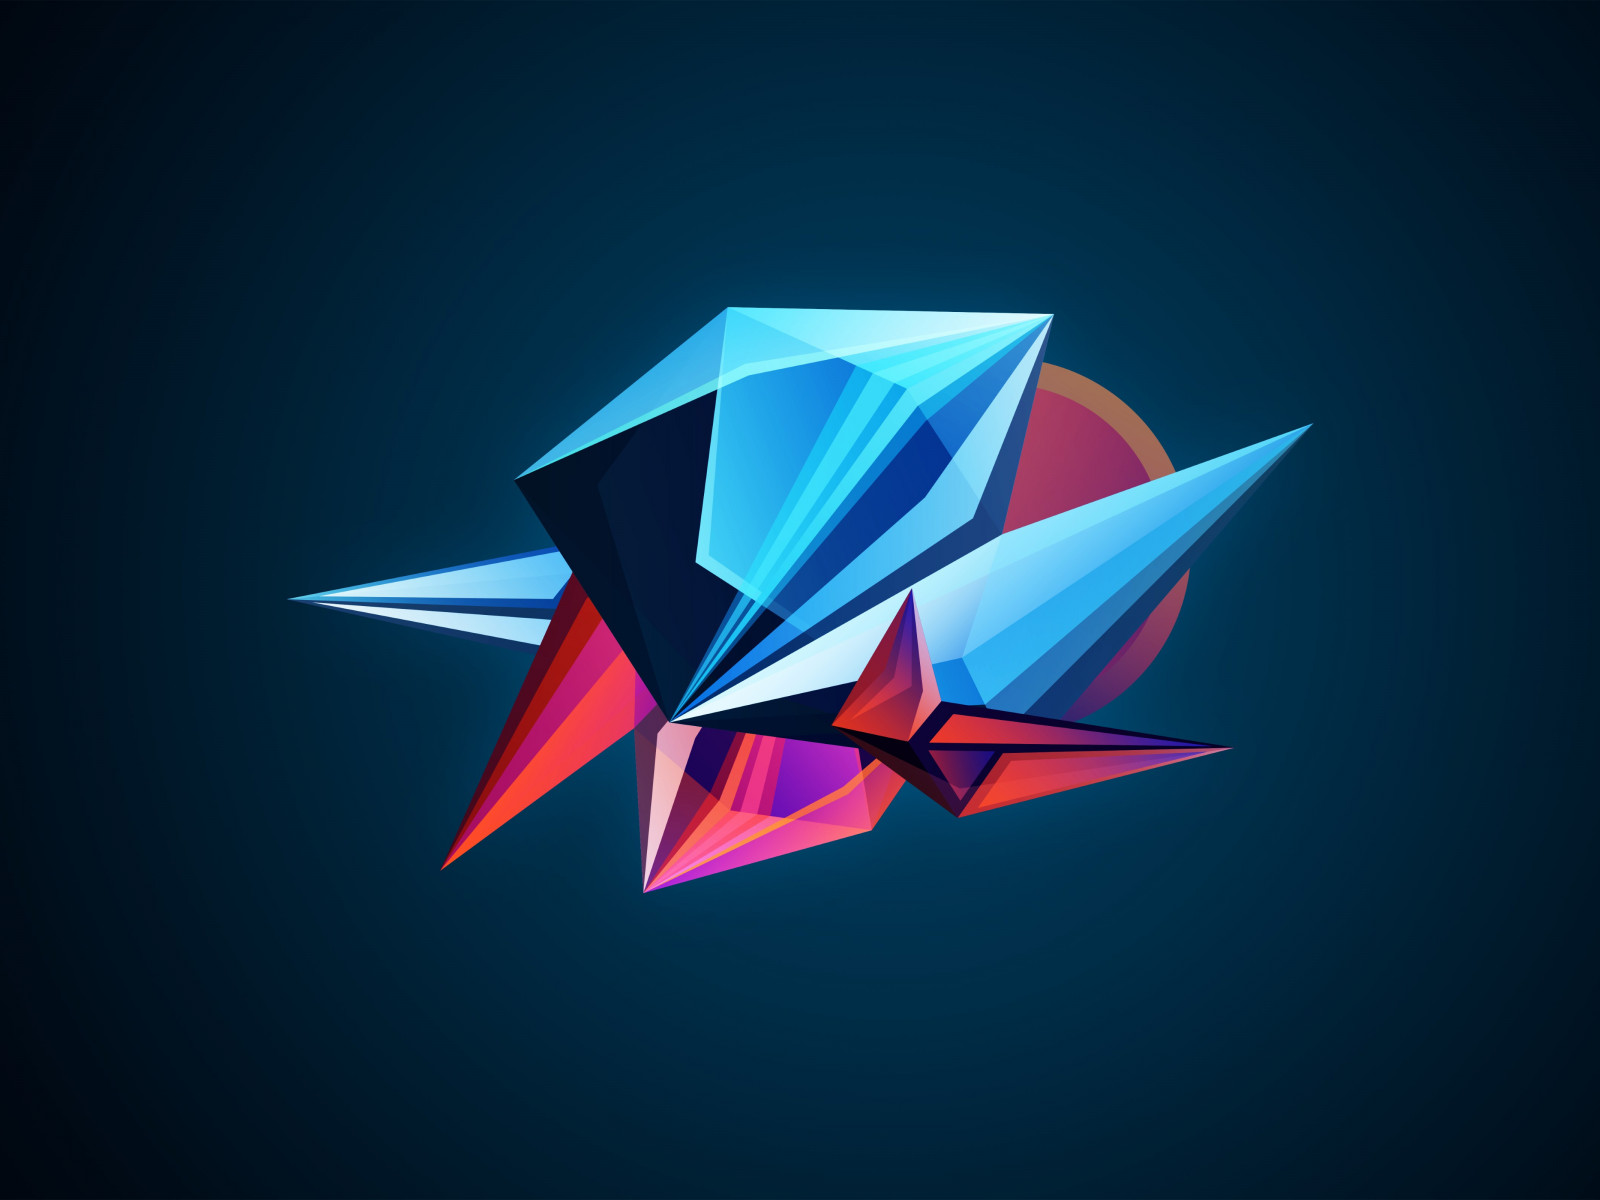 Abstract 3D shapes wallpaper 1600x1200